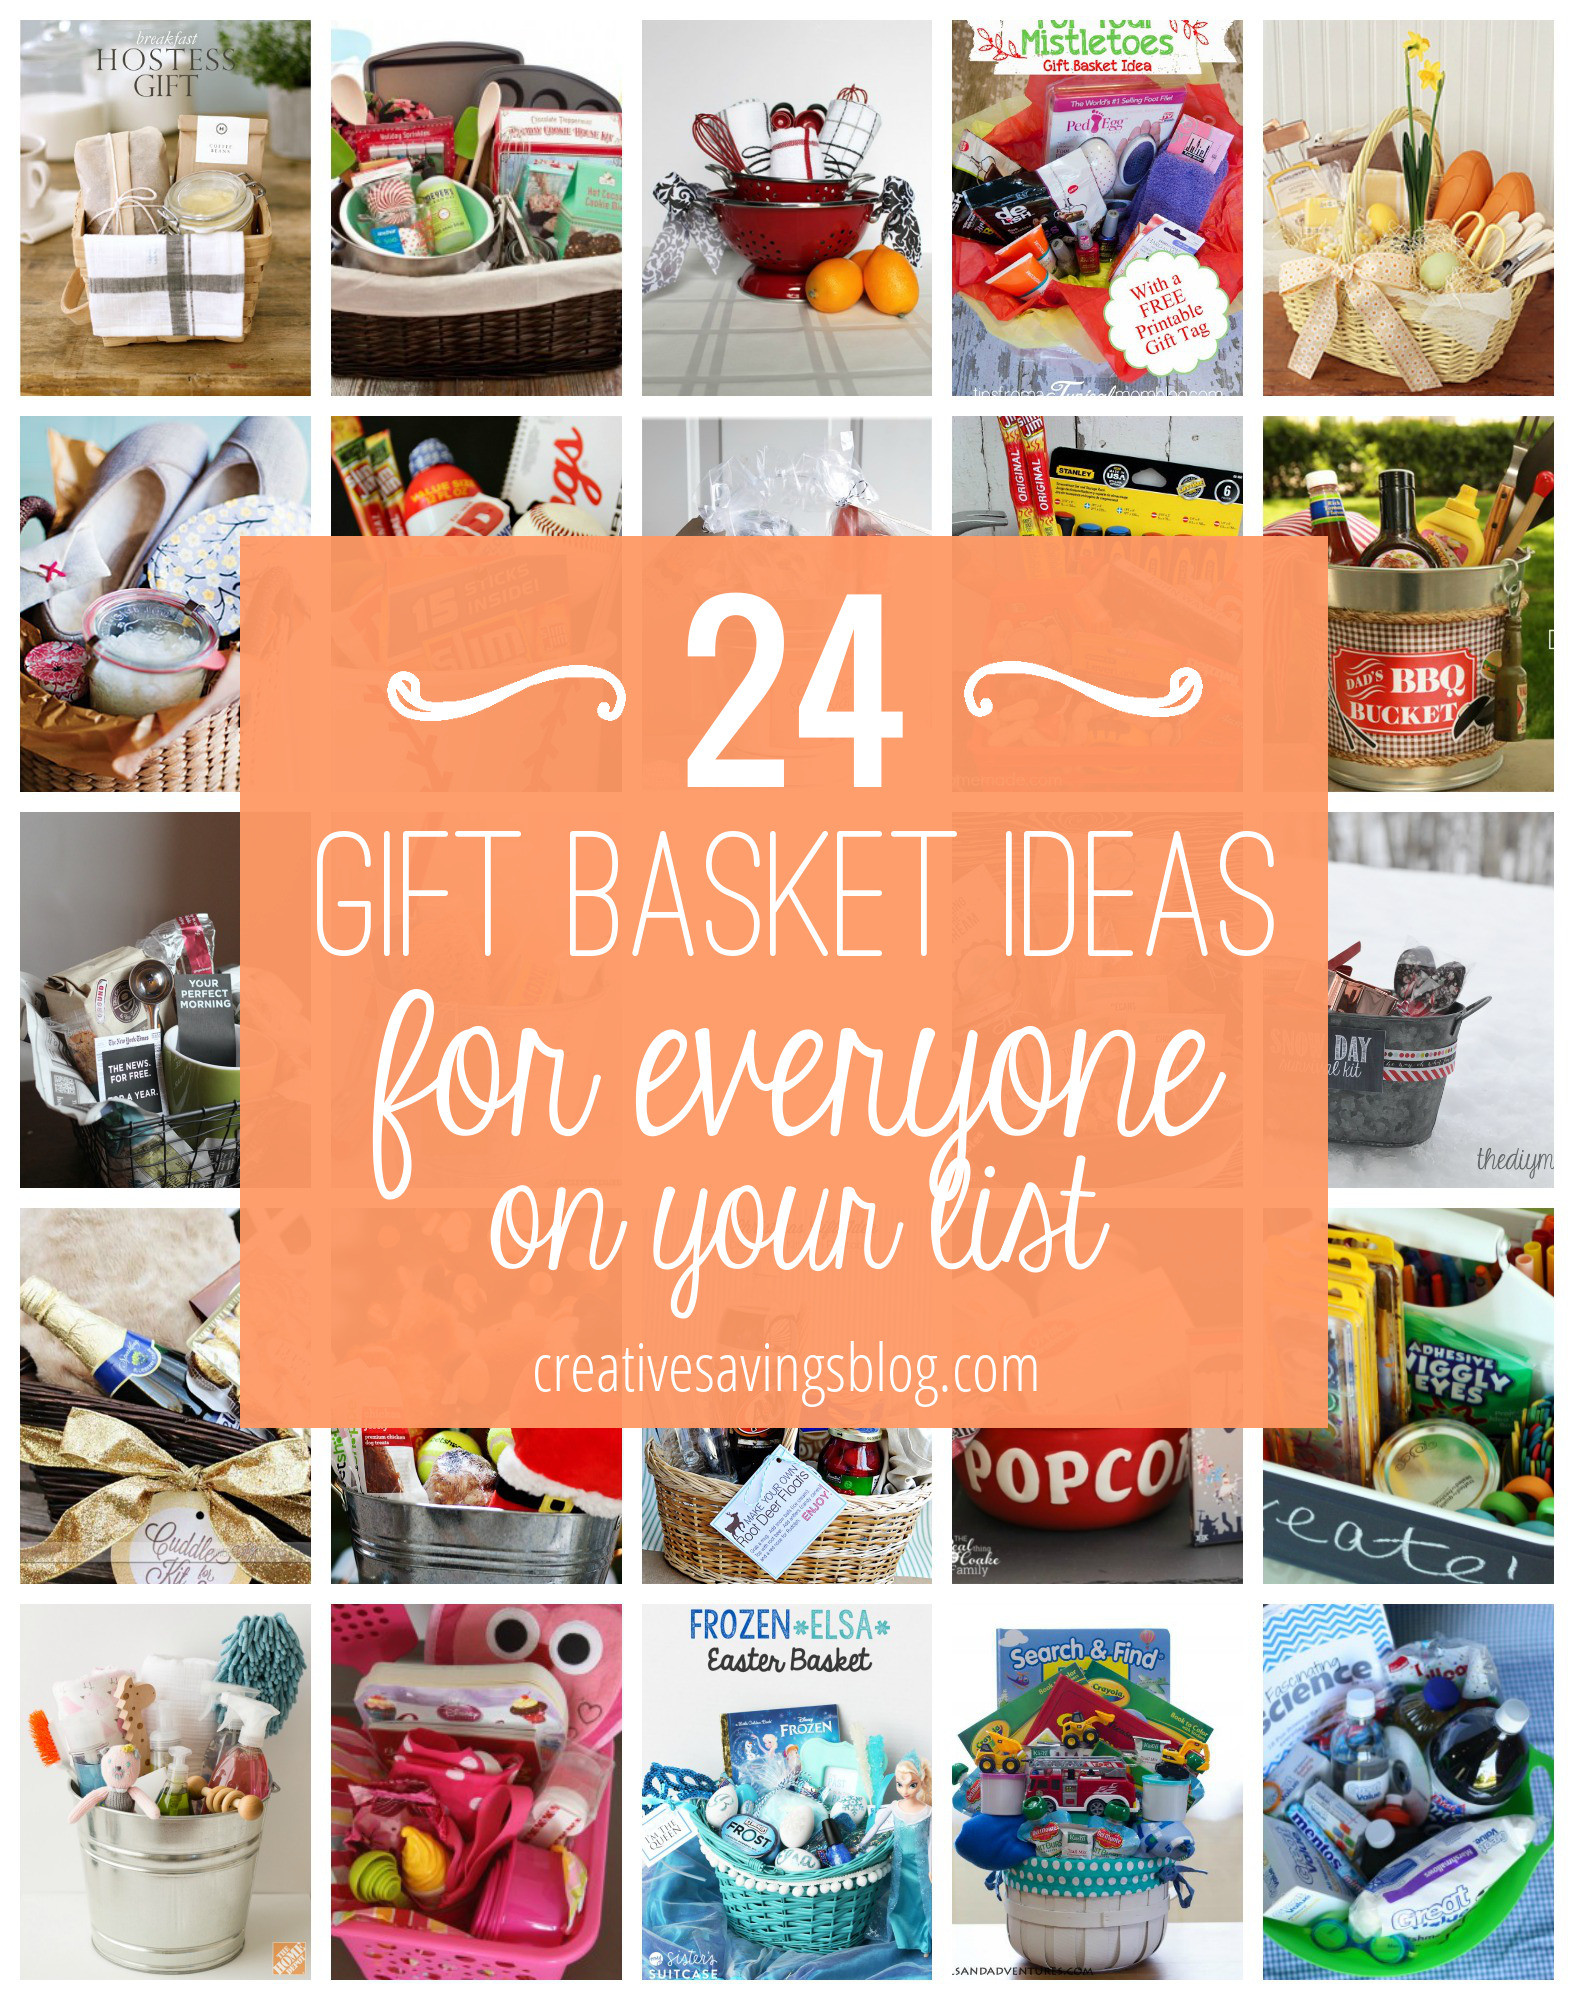 Diy Gift Basket Theme Ideas
 DIY Gift Basket Ideas for Everyone on Your List